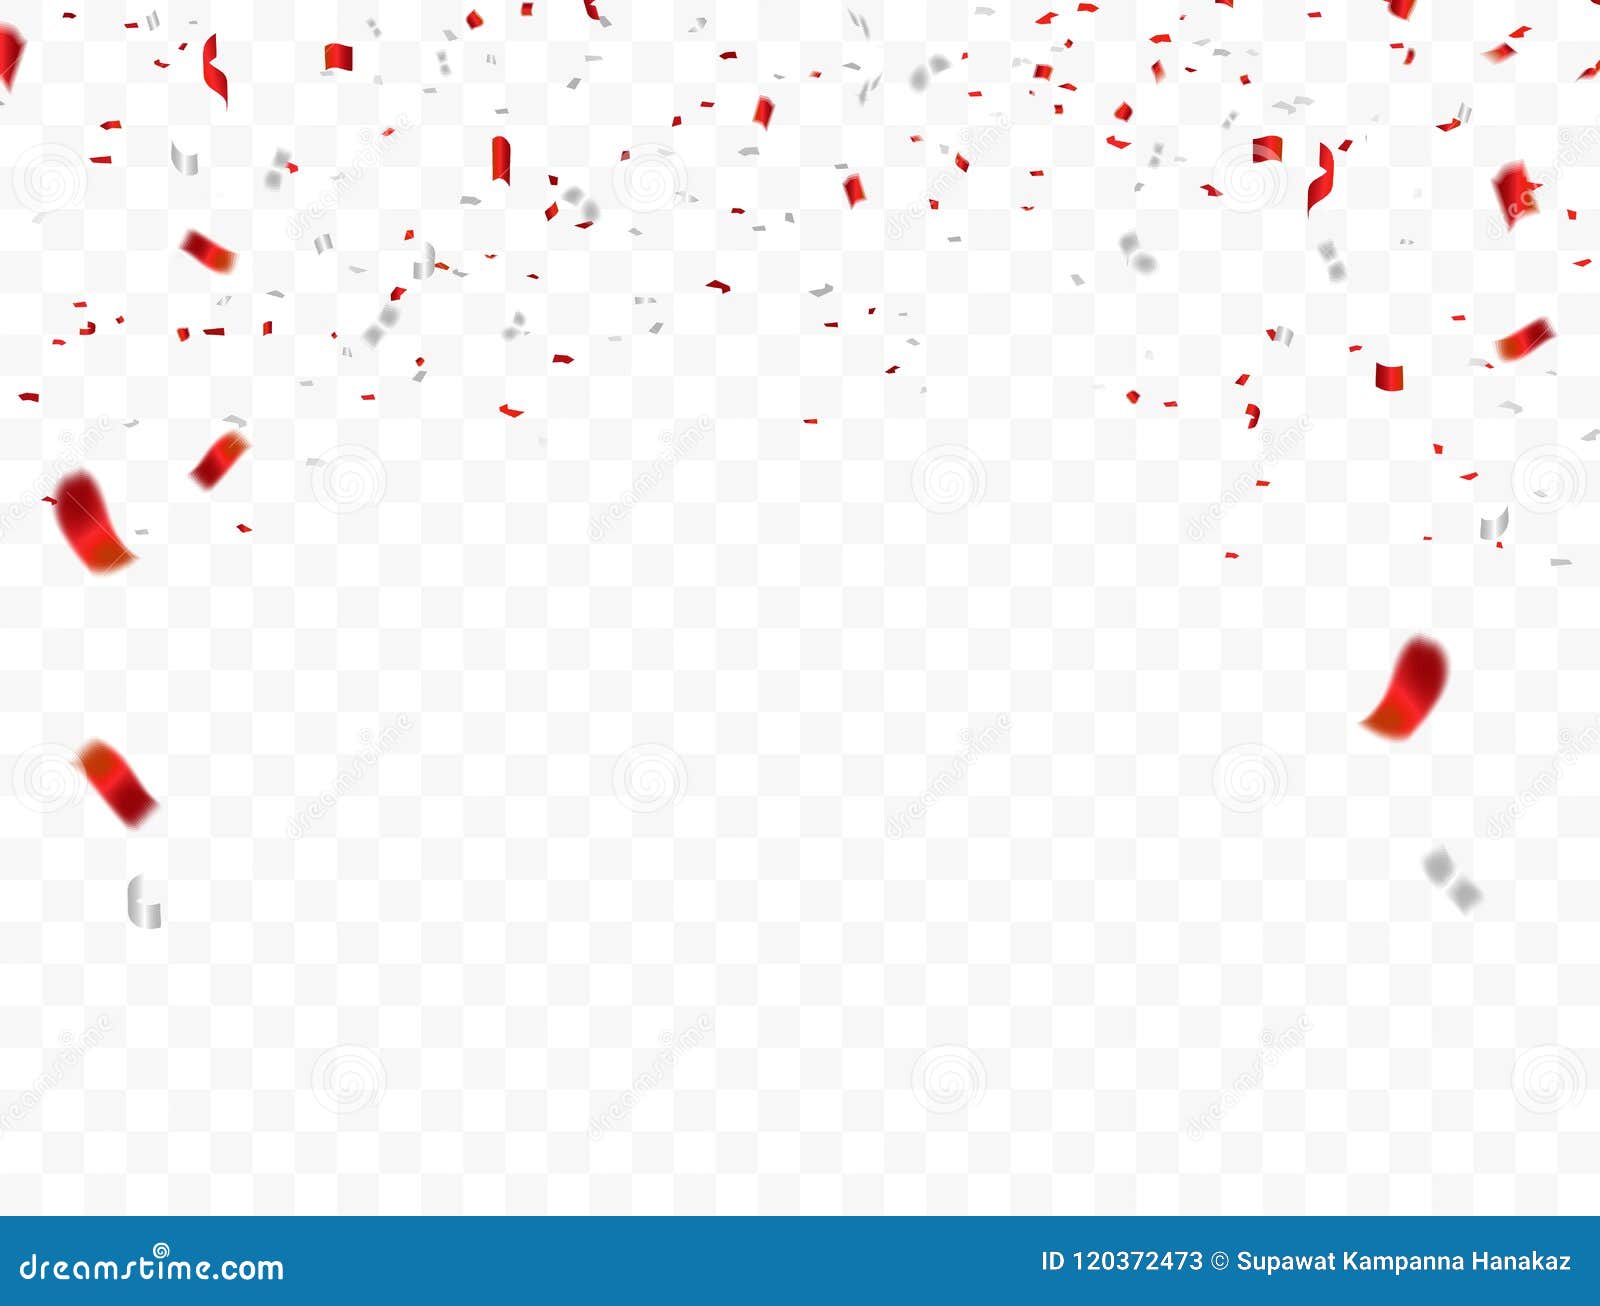 Red White design 2019, confetti concept 17 August Happy Independence Day greeting background. Celebration Vector illustration.